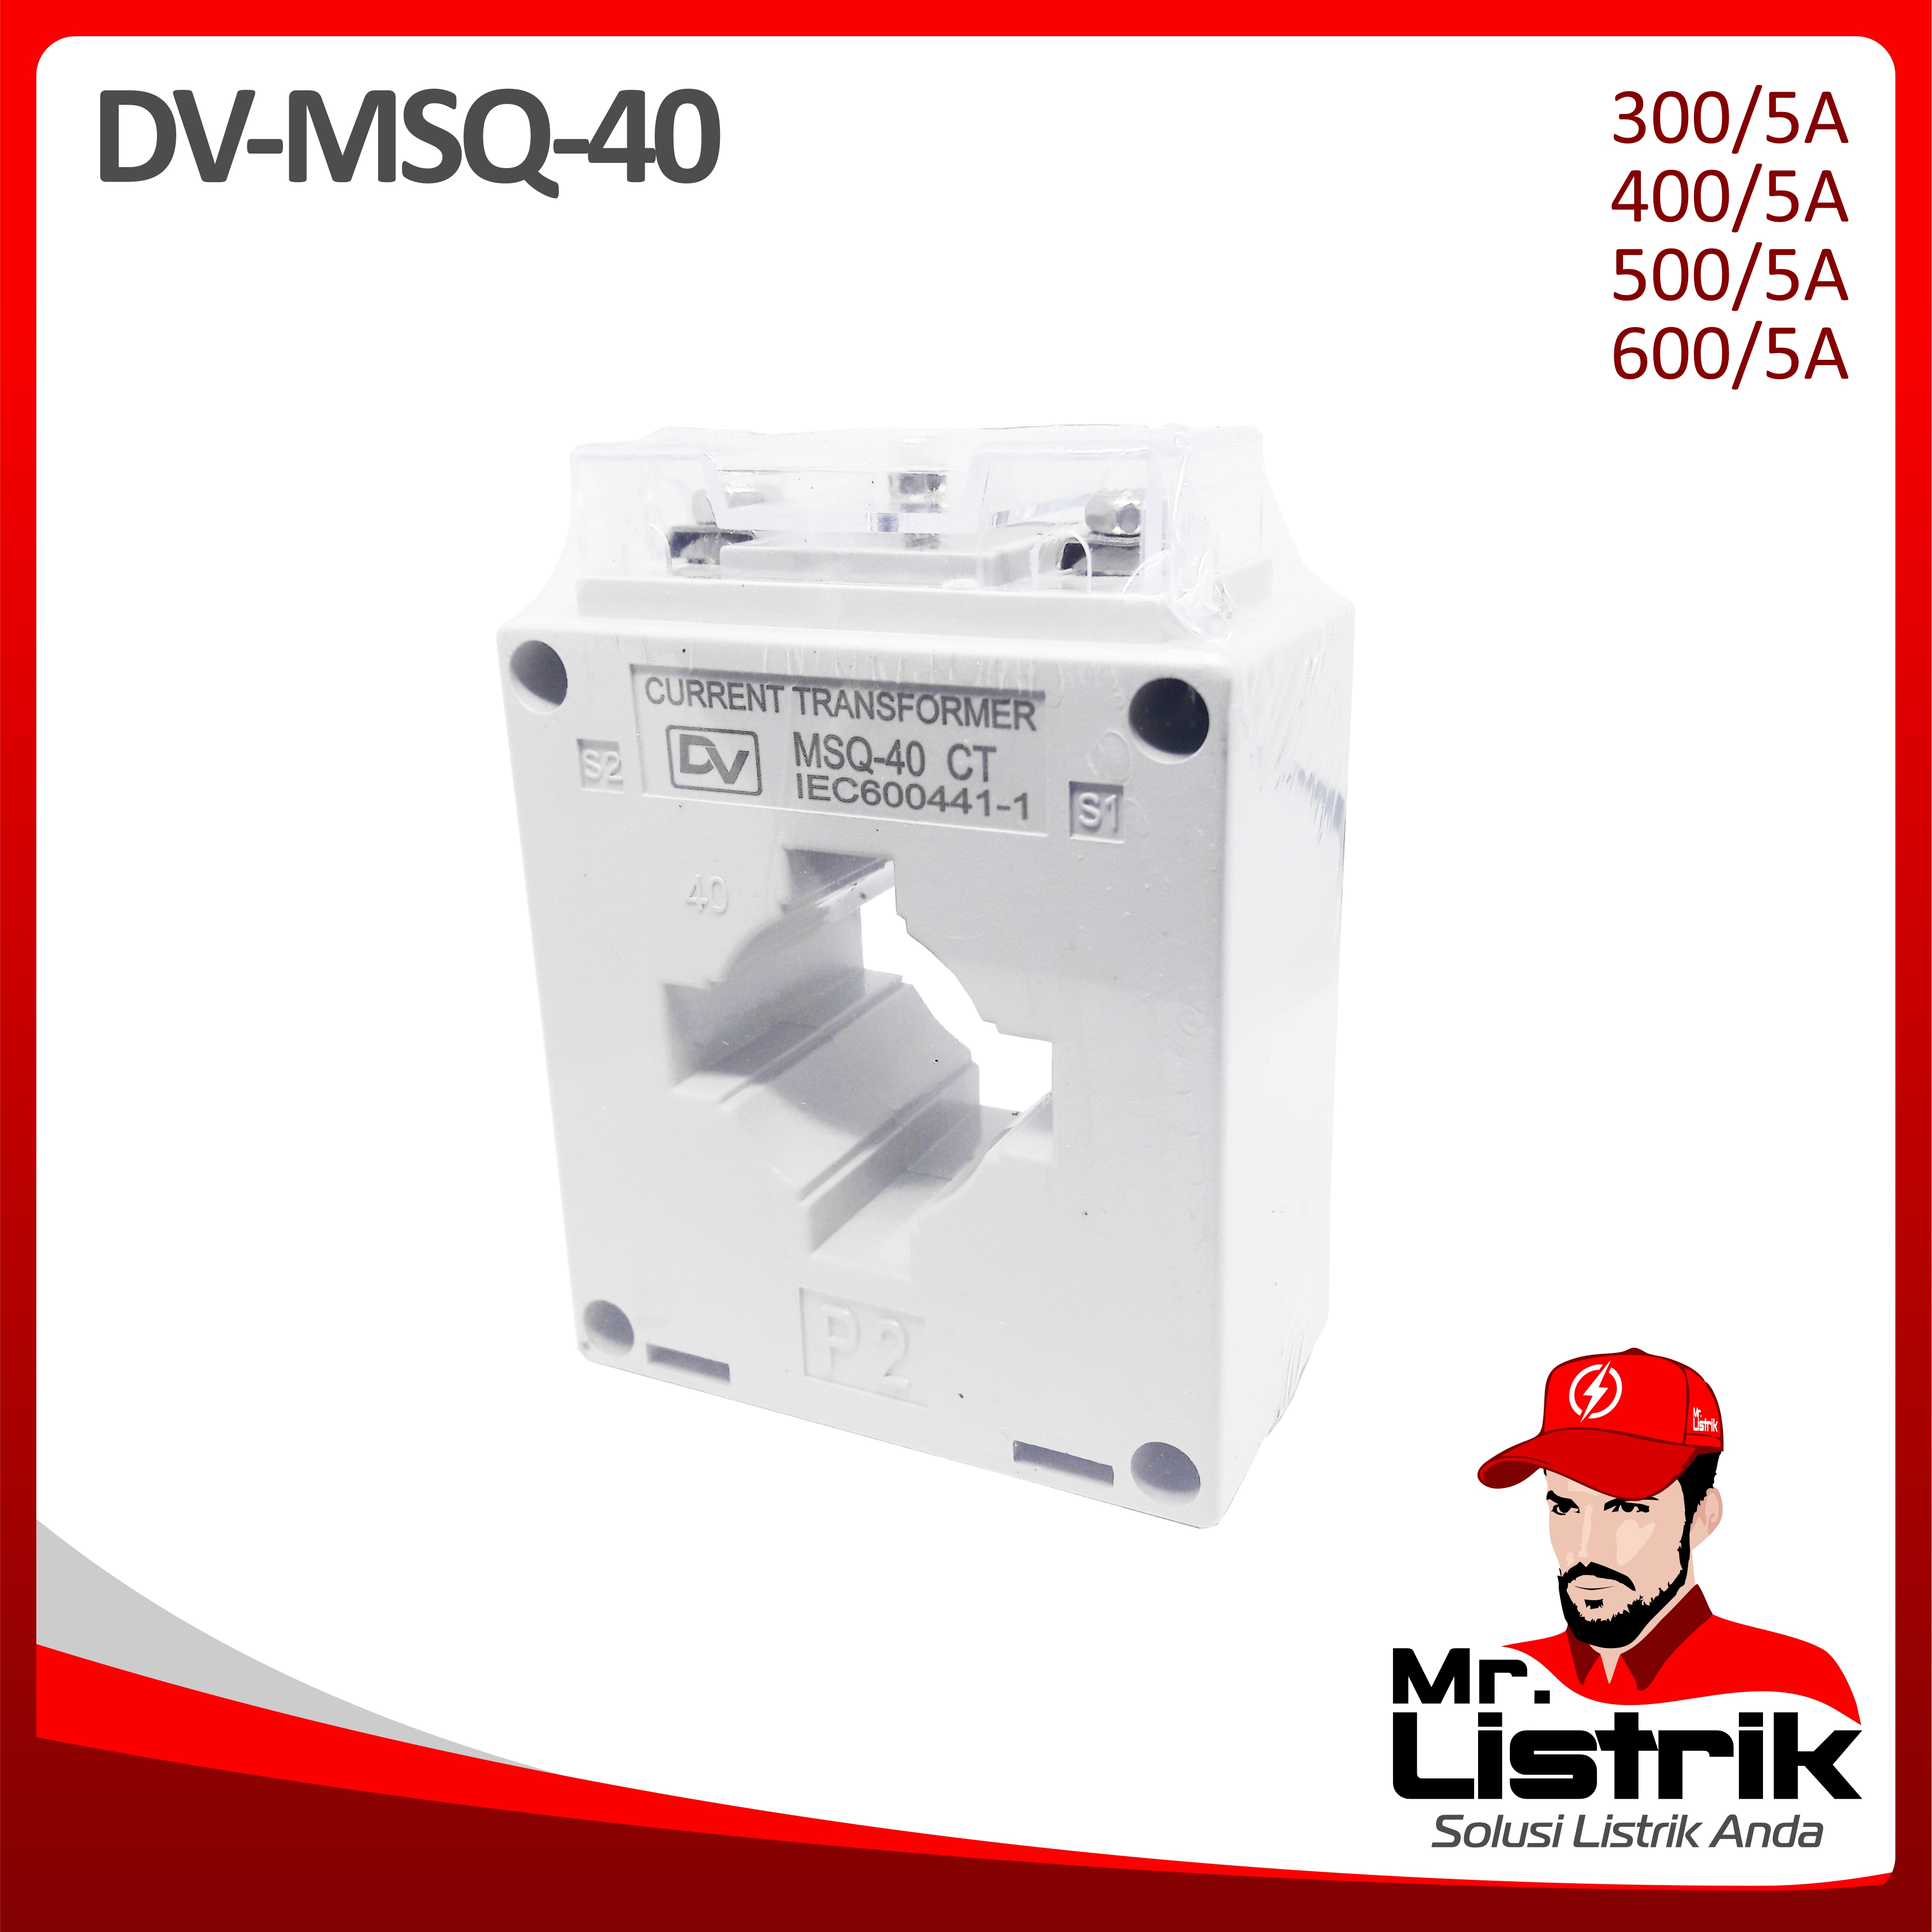 Current Transformer DV Fixed Type MSQ-40 300/5A